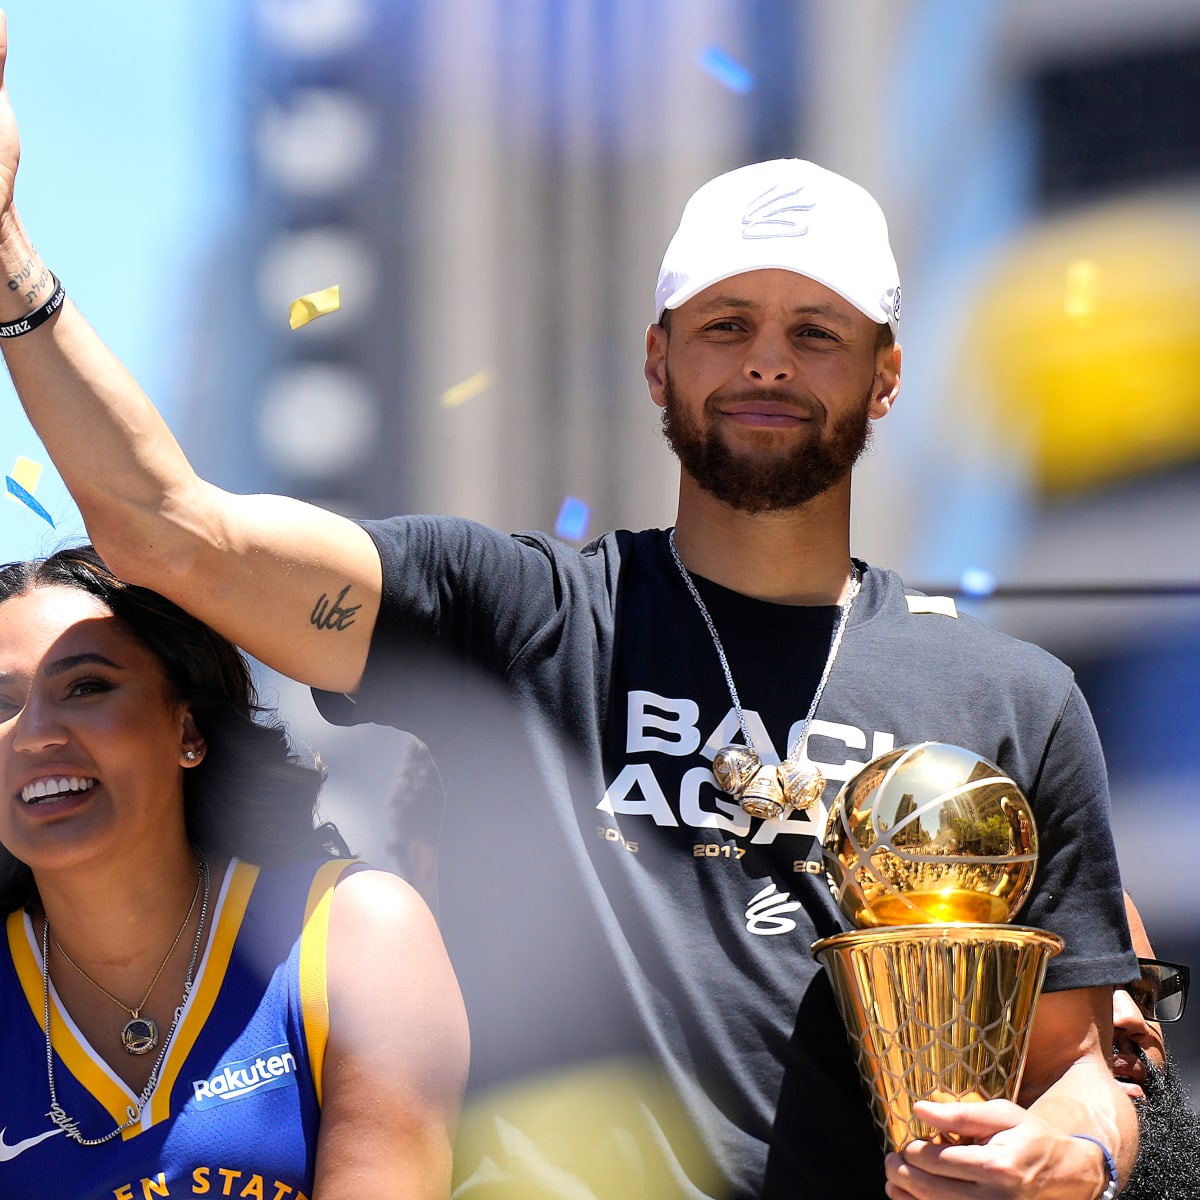 Ayesha Curry and sports star Stephen Curry celebrate their 11th